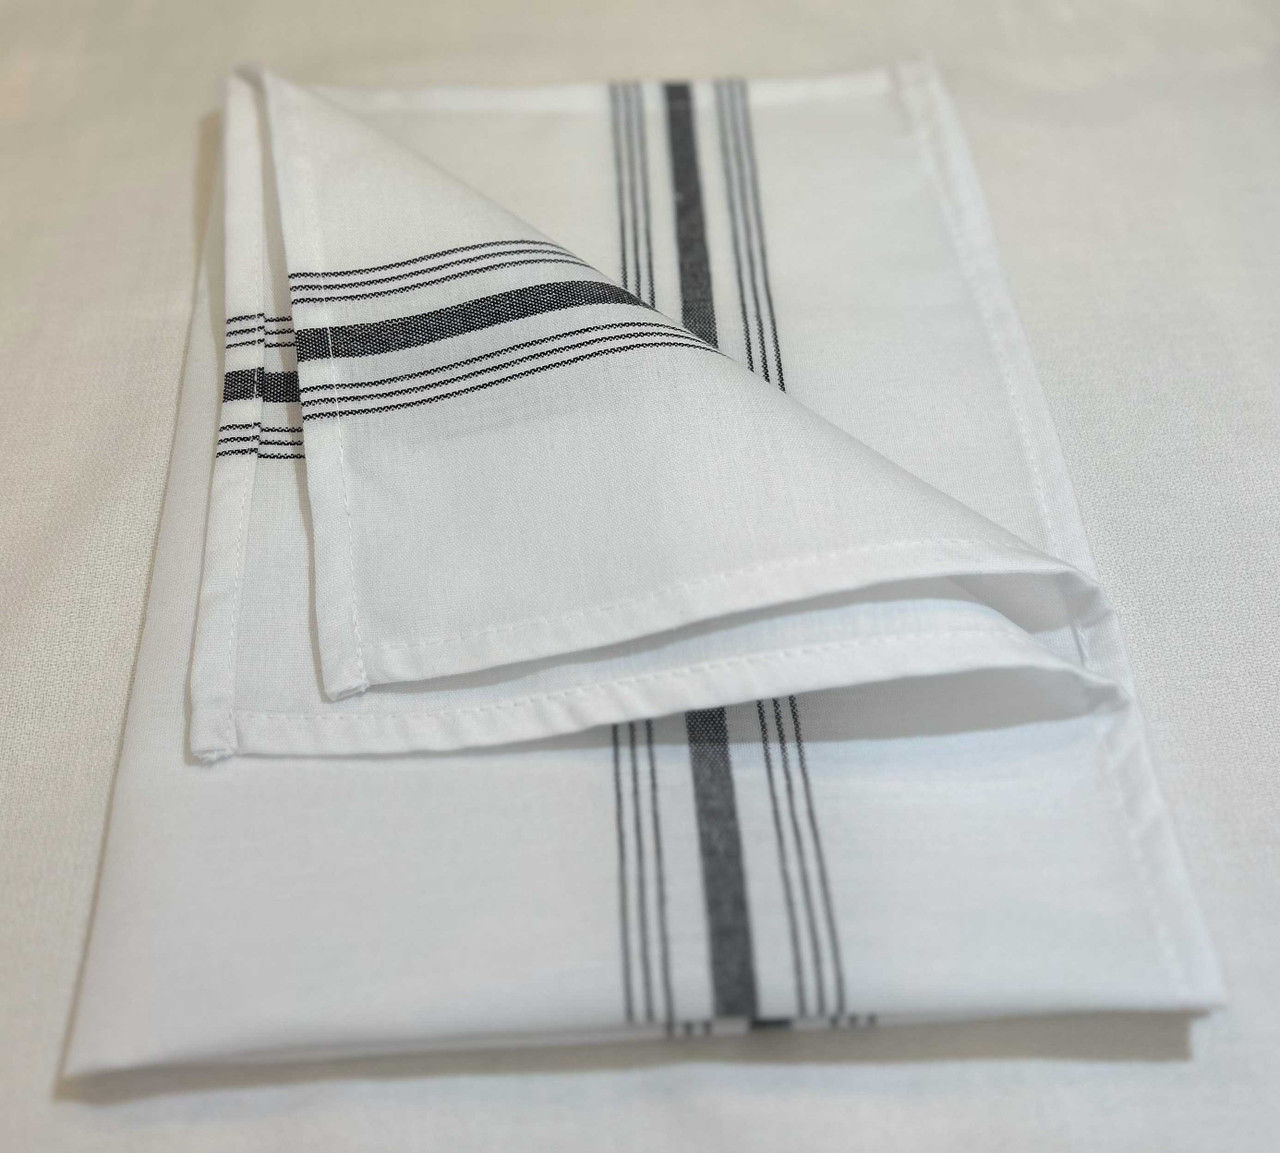 Do you have wholesale table linens in other colors?